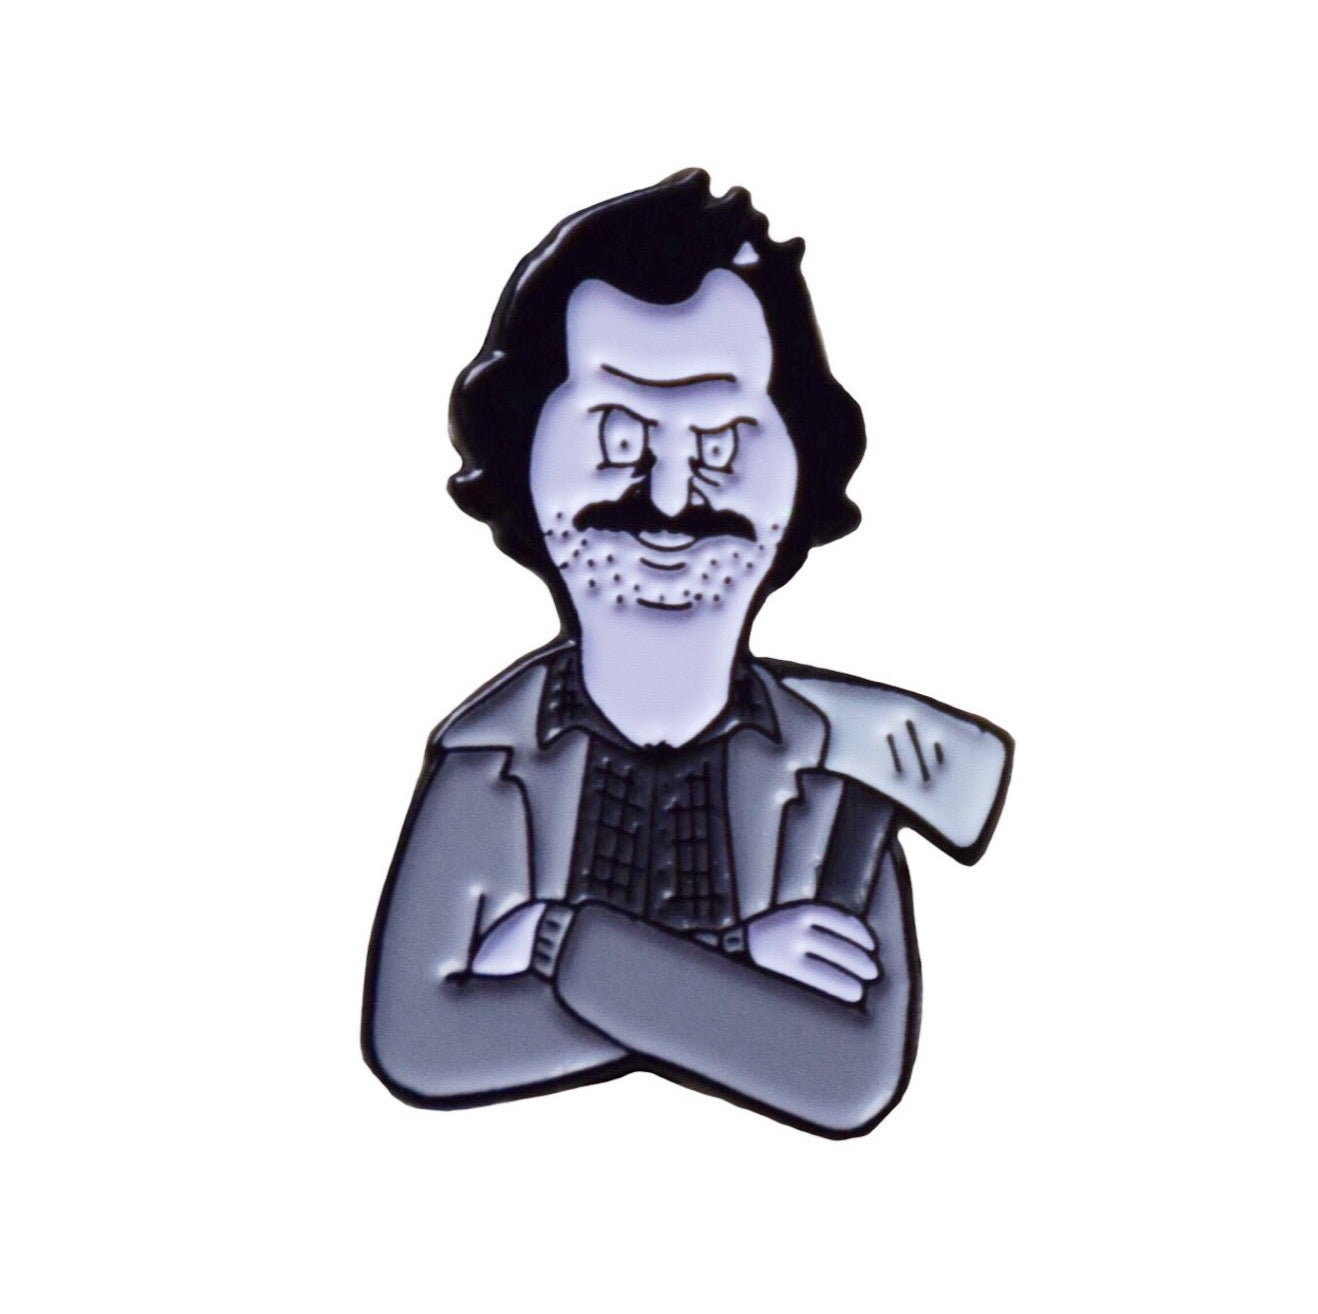 Jack B The Shinning Enamel Pin with @hollyoddly